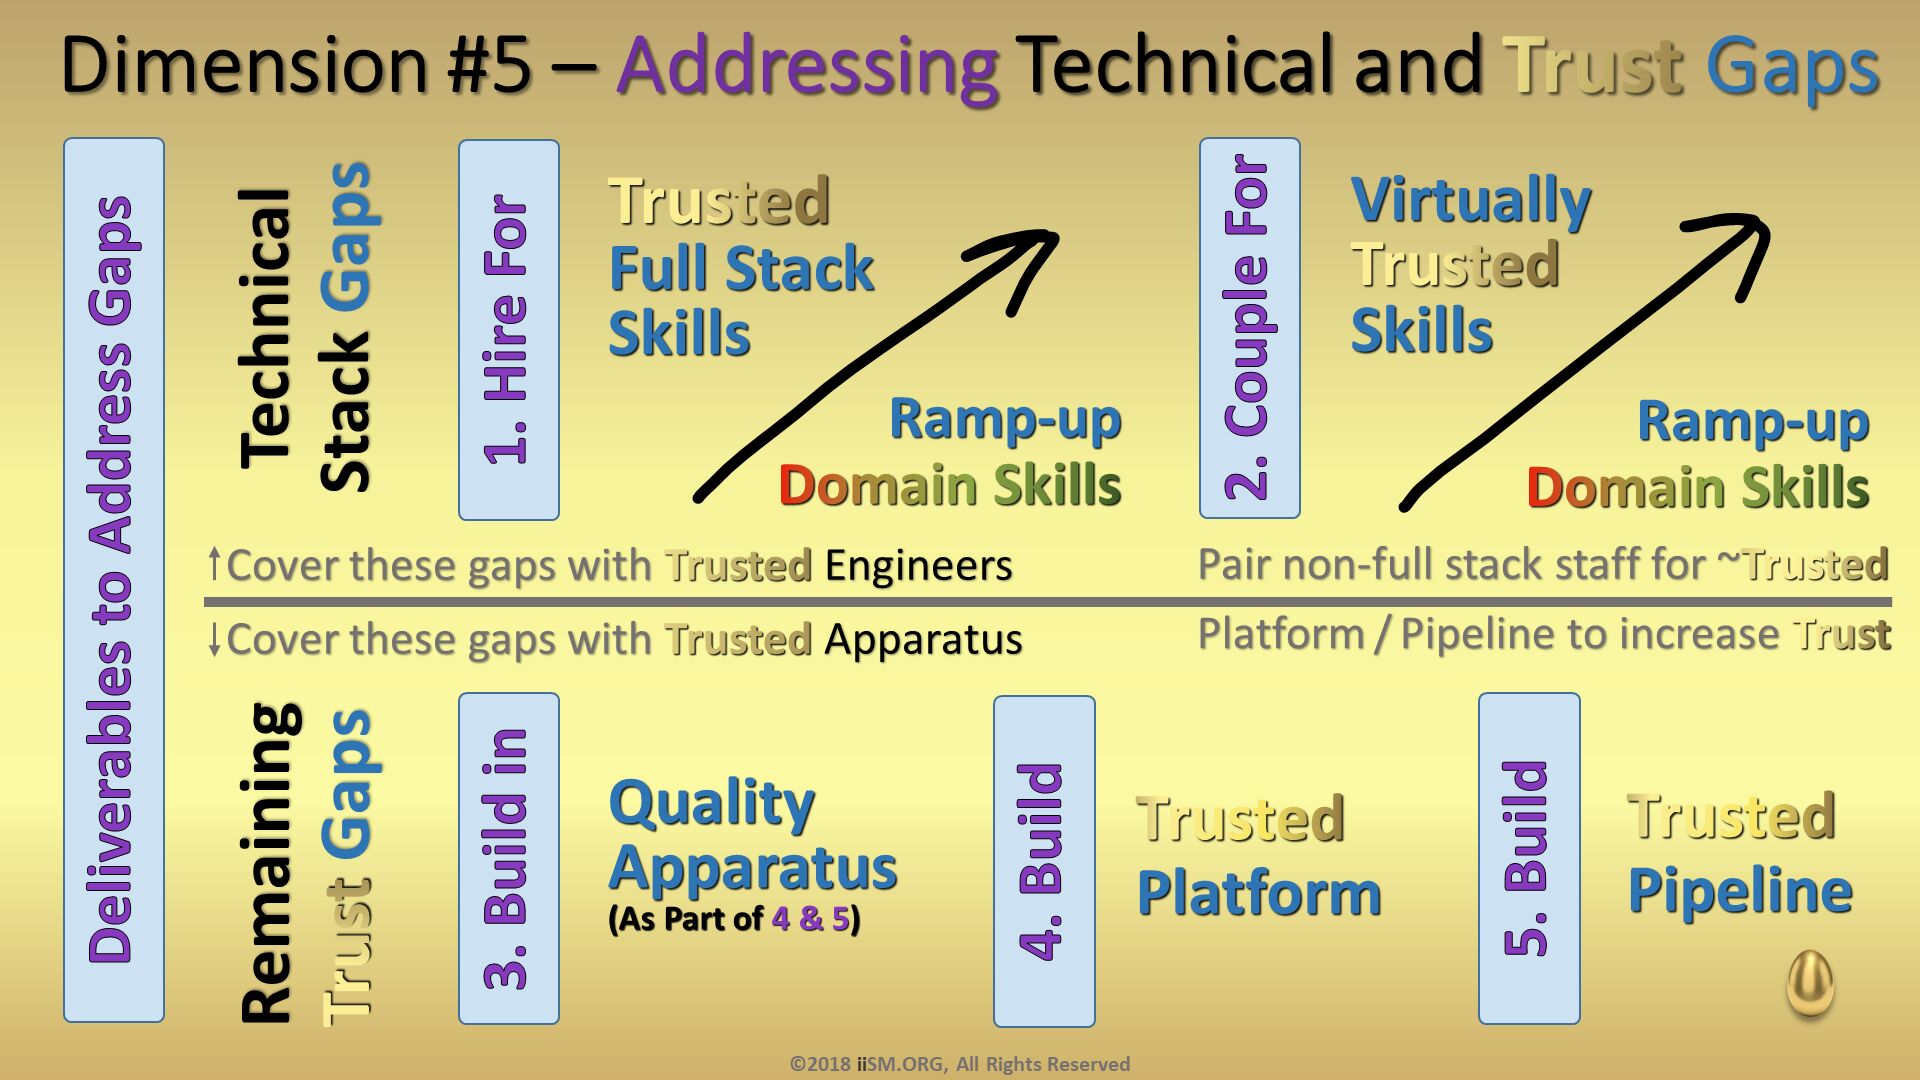 Platform / Pipeline to increase Trust. Technical
Stack Gaps. Remaining Trust Gaps. Dimension #5 – Addressing Technical and Trust Gaps. 1. Hire For. 2. Couple For. Trusted Full StackSkills. Ramp-upDomain Skills. Virtually
TrustedSkills. Ramp-upDomain Skills. 3. Build in. 4. Build. Quality
Apparatus
(As Part of 4 & 5). Trusted Platform. 5. Build. Trusted
Pipeline. Deliverables to Address Gaps. Cover these gaps with Trusted Engineers. Cover these gaps with Trusted Apparatus. Pair non-full stack staff for ~Trusted. ©2018 iiSM.ORG, All Rights Reserved. 